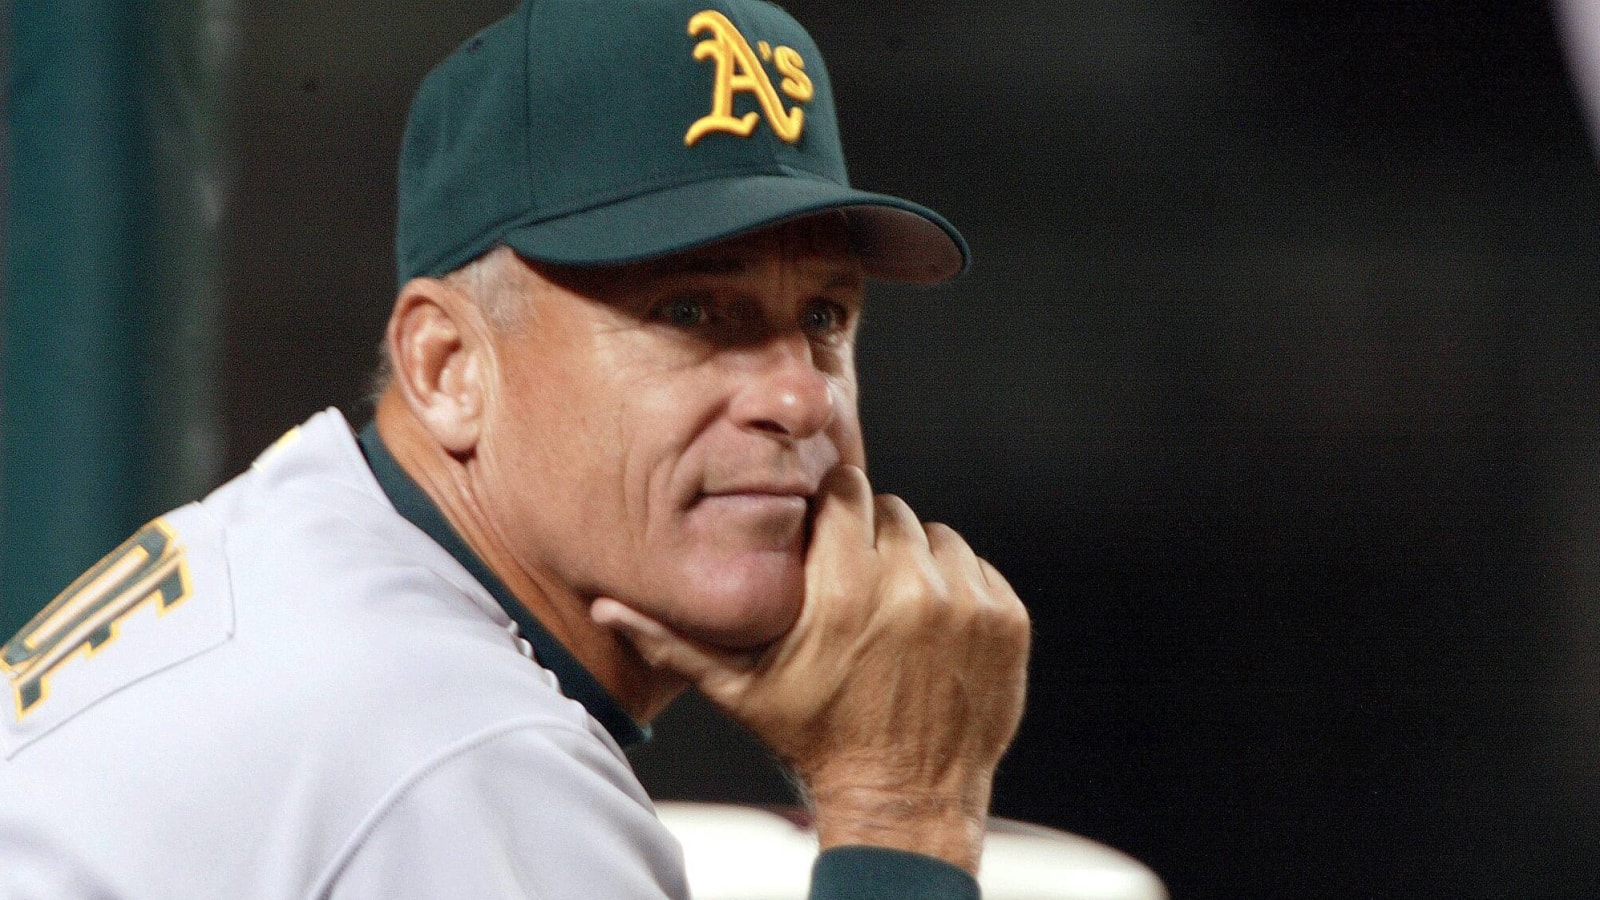 MLB Top 5: Oakland Athletics Catchers and Managers